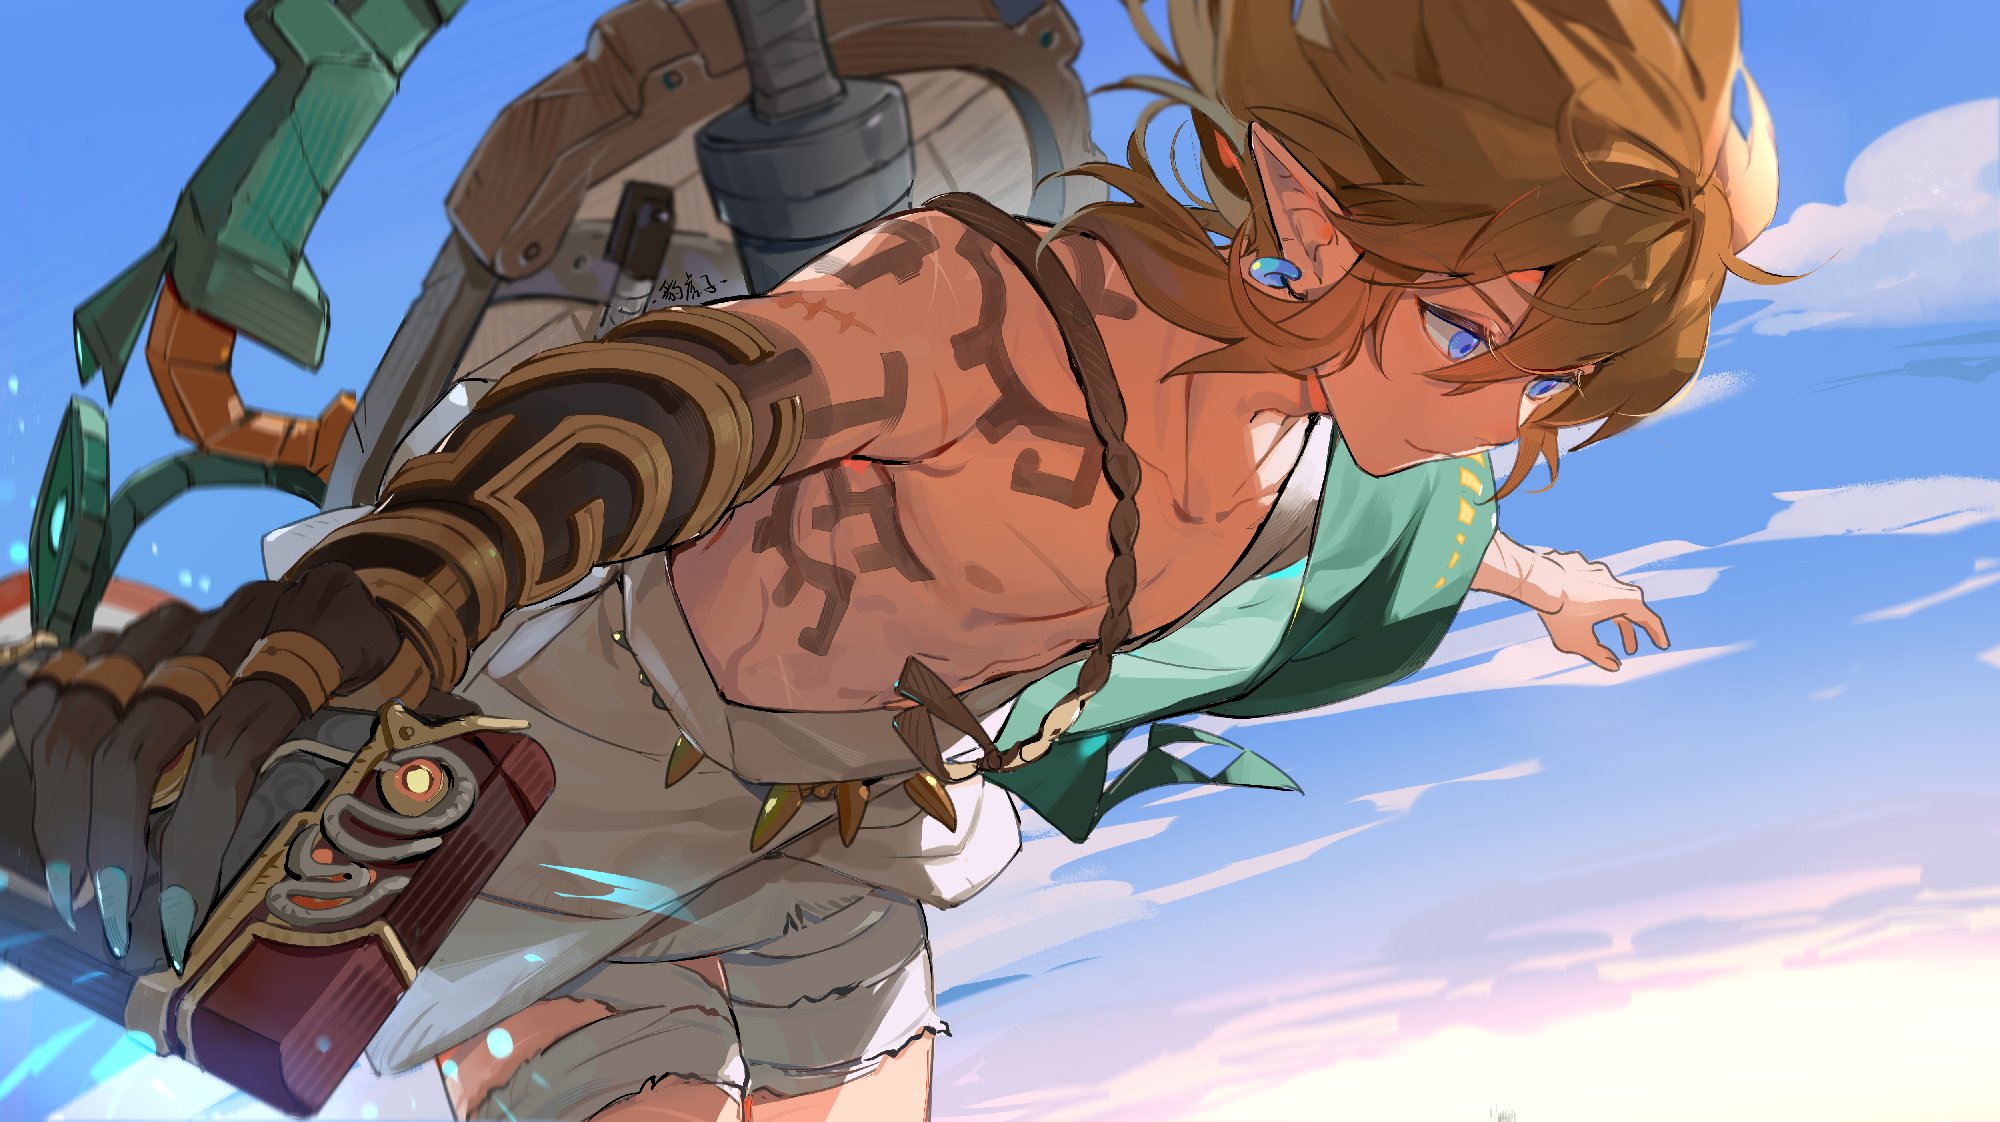 Anime 2000x1122 Link The Legend of Zelda: Tears of the Kingdom anime boys pointy ears earring shirtless sky blonde blue eyes video game characters video game boys video games